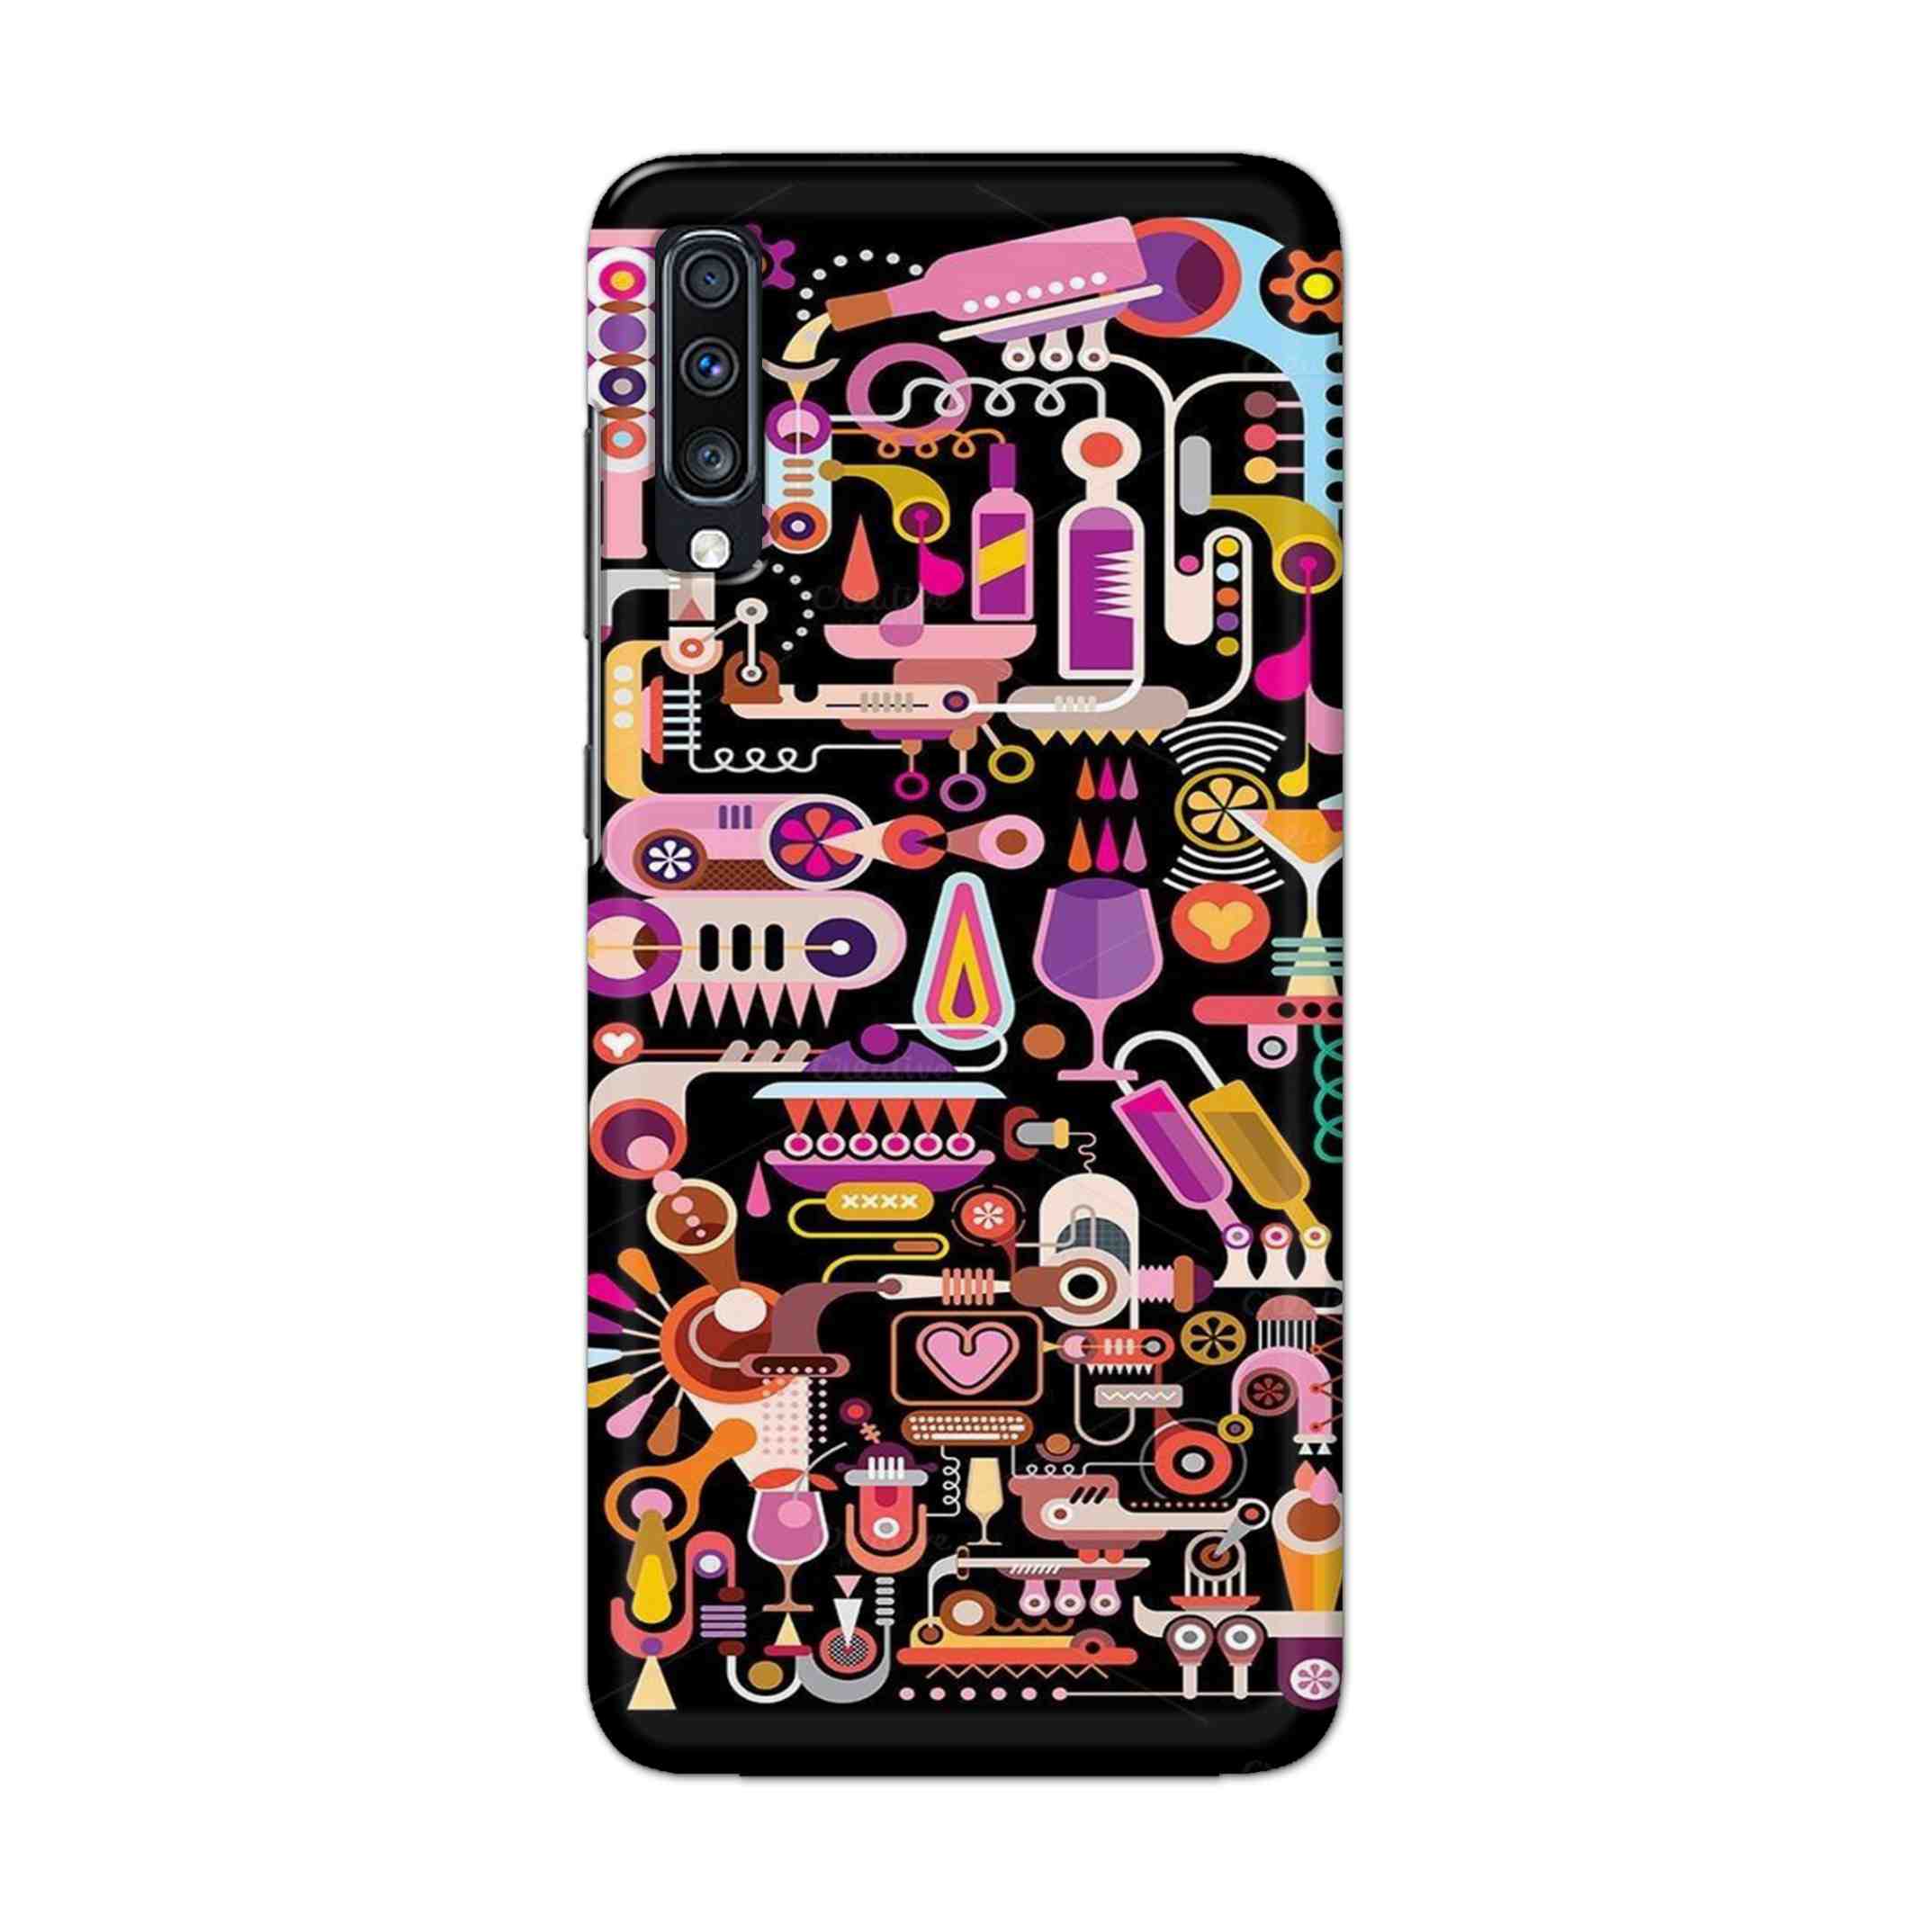 Buy Lab Art Hard Back Mobile Phone Case Cover For Samsung Galaxy A70 Online